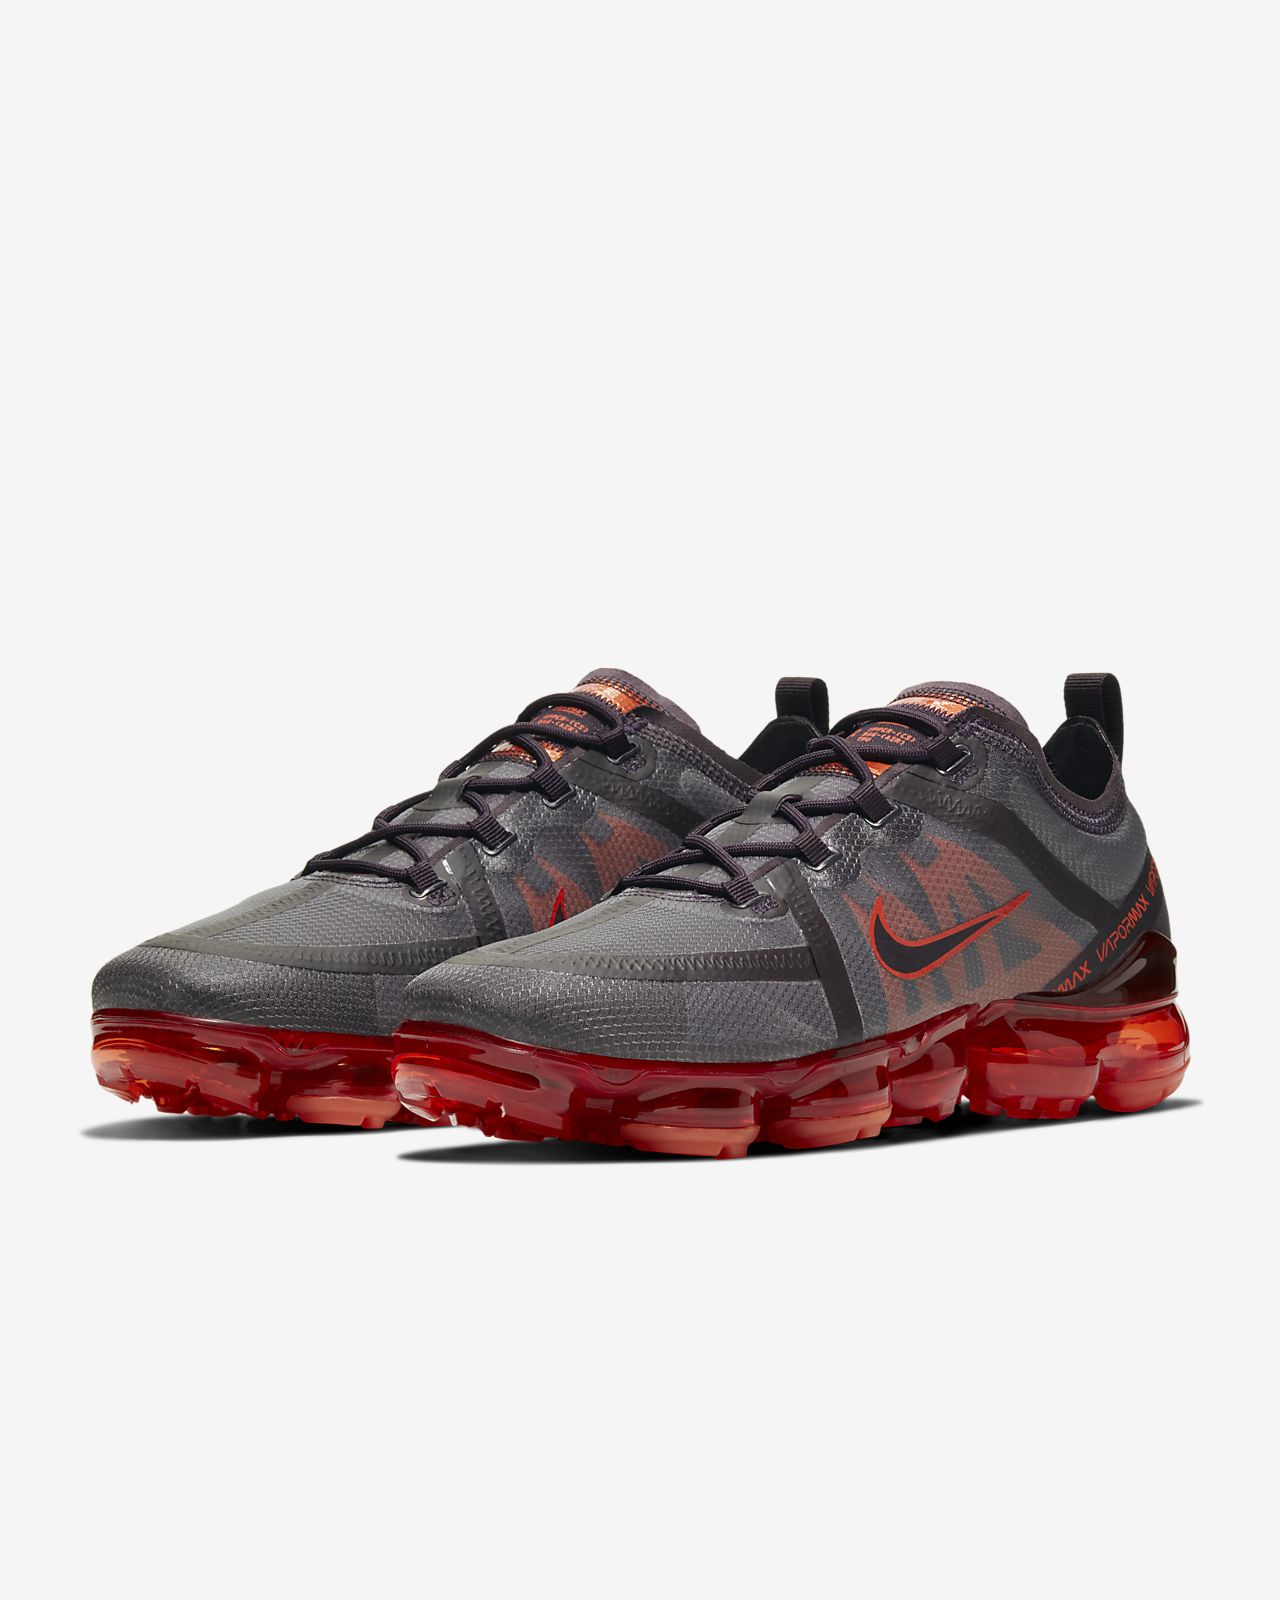 vapormax 2019 true to size